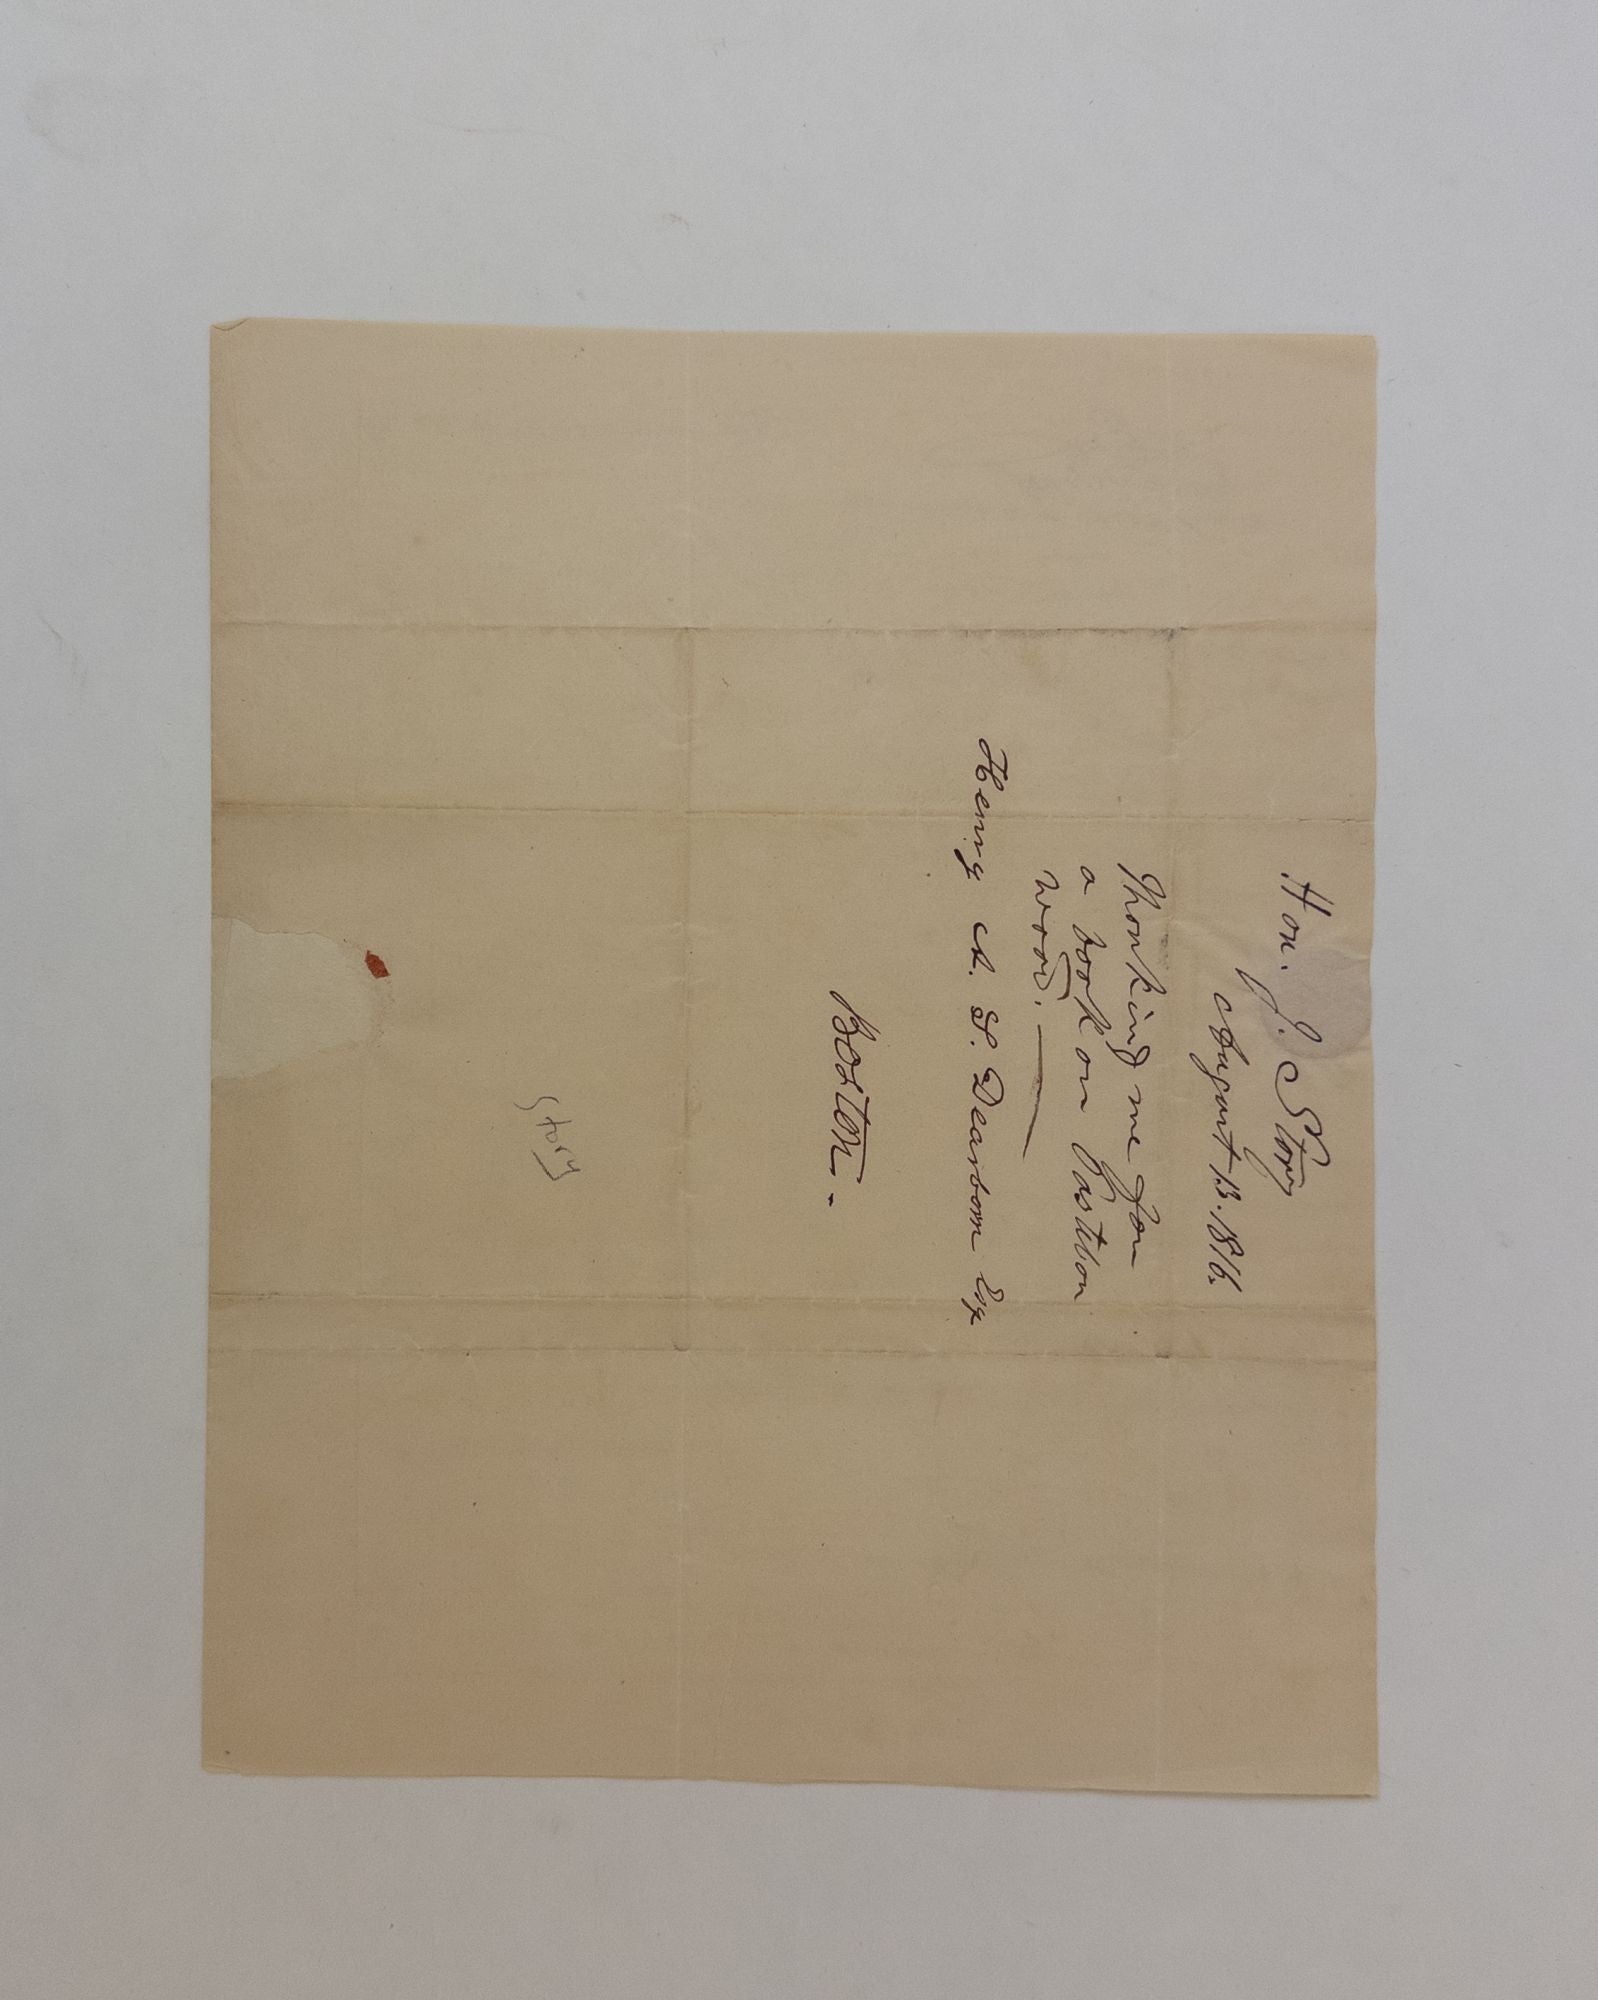 Product Image for JOSEPH STORY | AUTOGRAPH LETTER SIGNED (ADDRESSED TO HENRY A.S. DEARBORN)